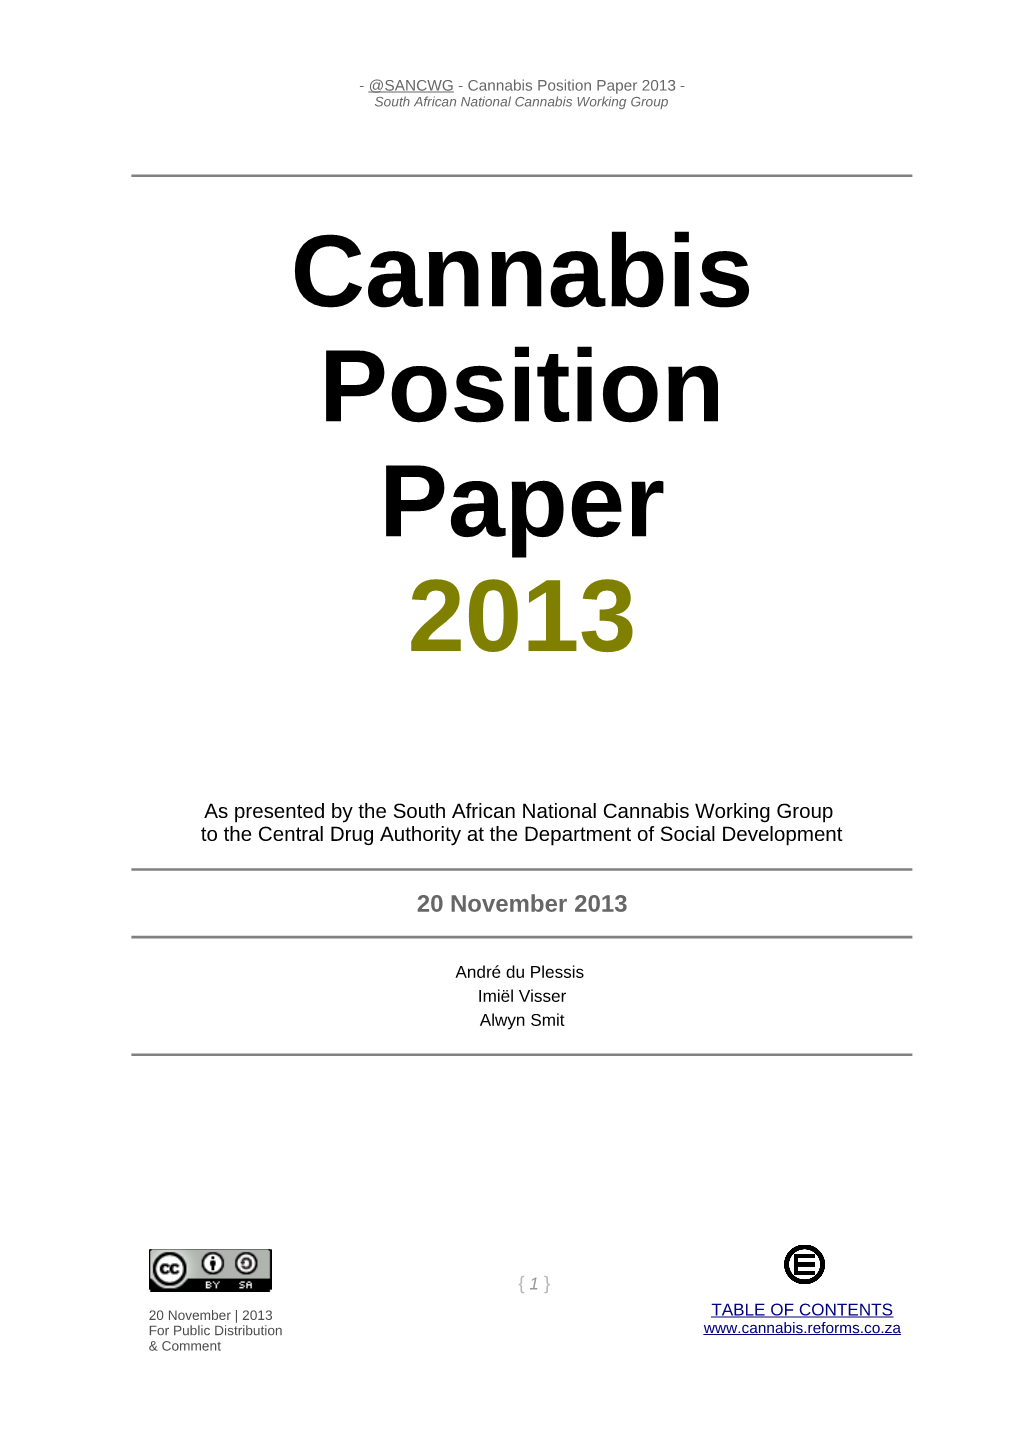 SANCWG - Cannabis Position Paper 2013 - South African National Cannabis Working Group